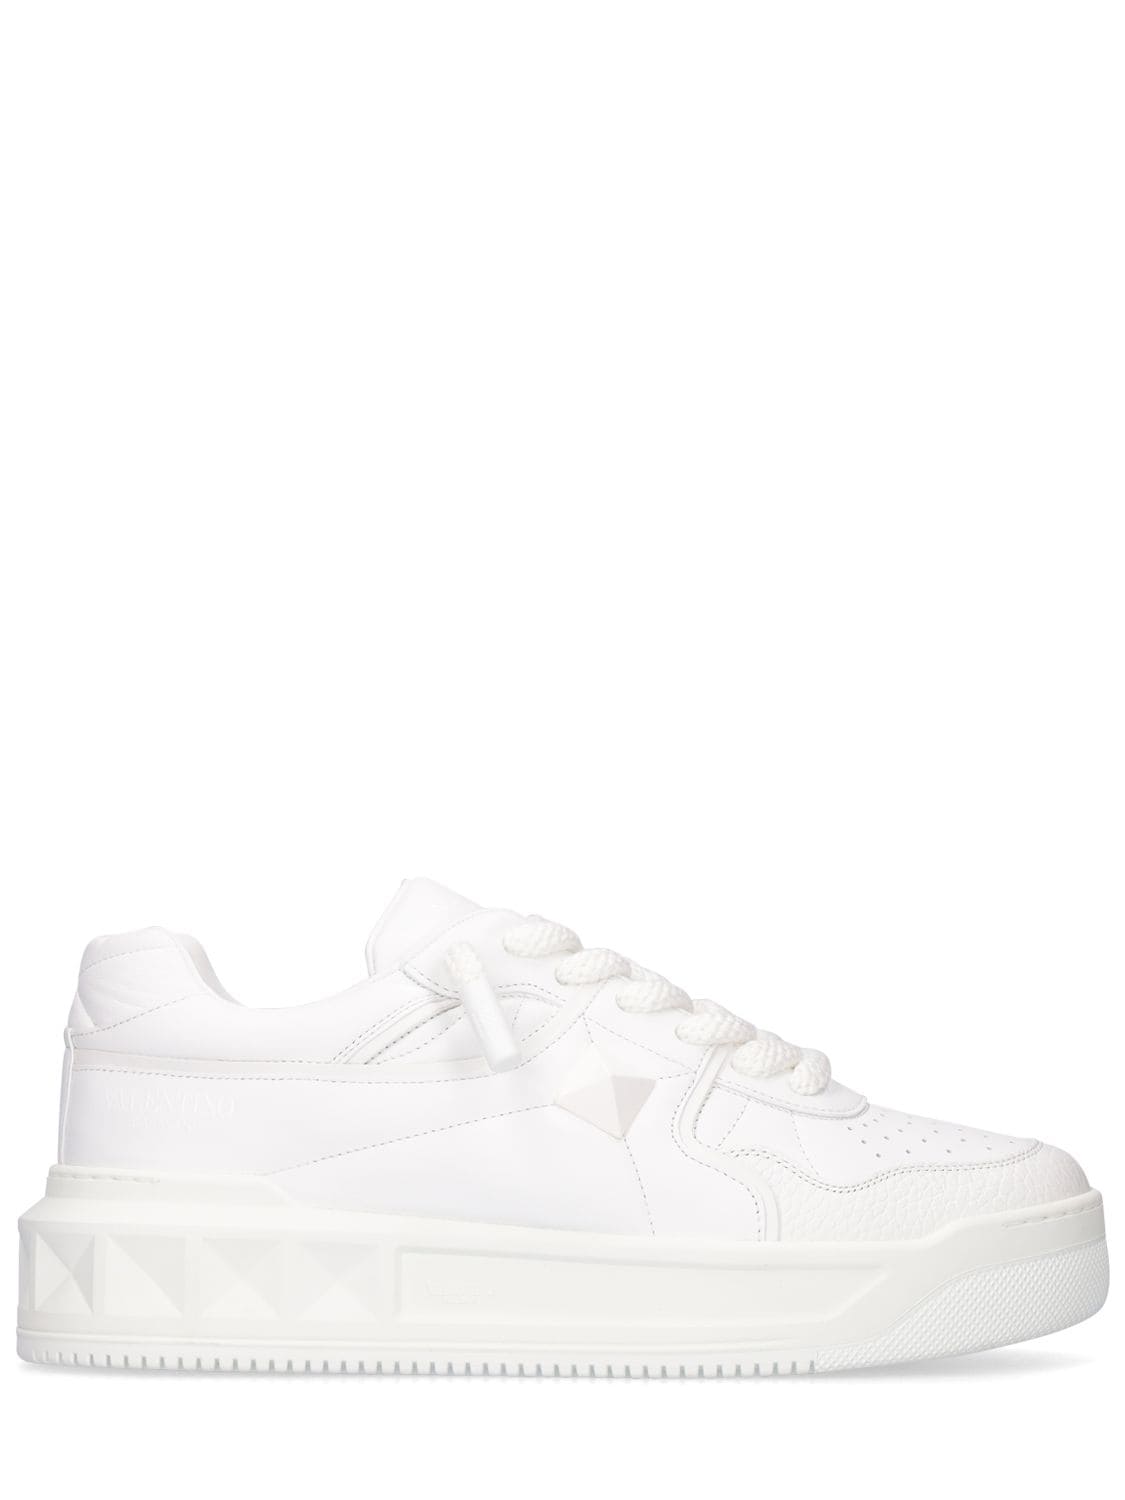 Image of Xl One Stud Leather Sneakers